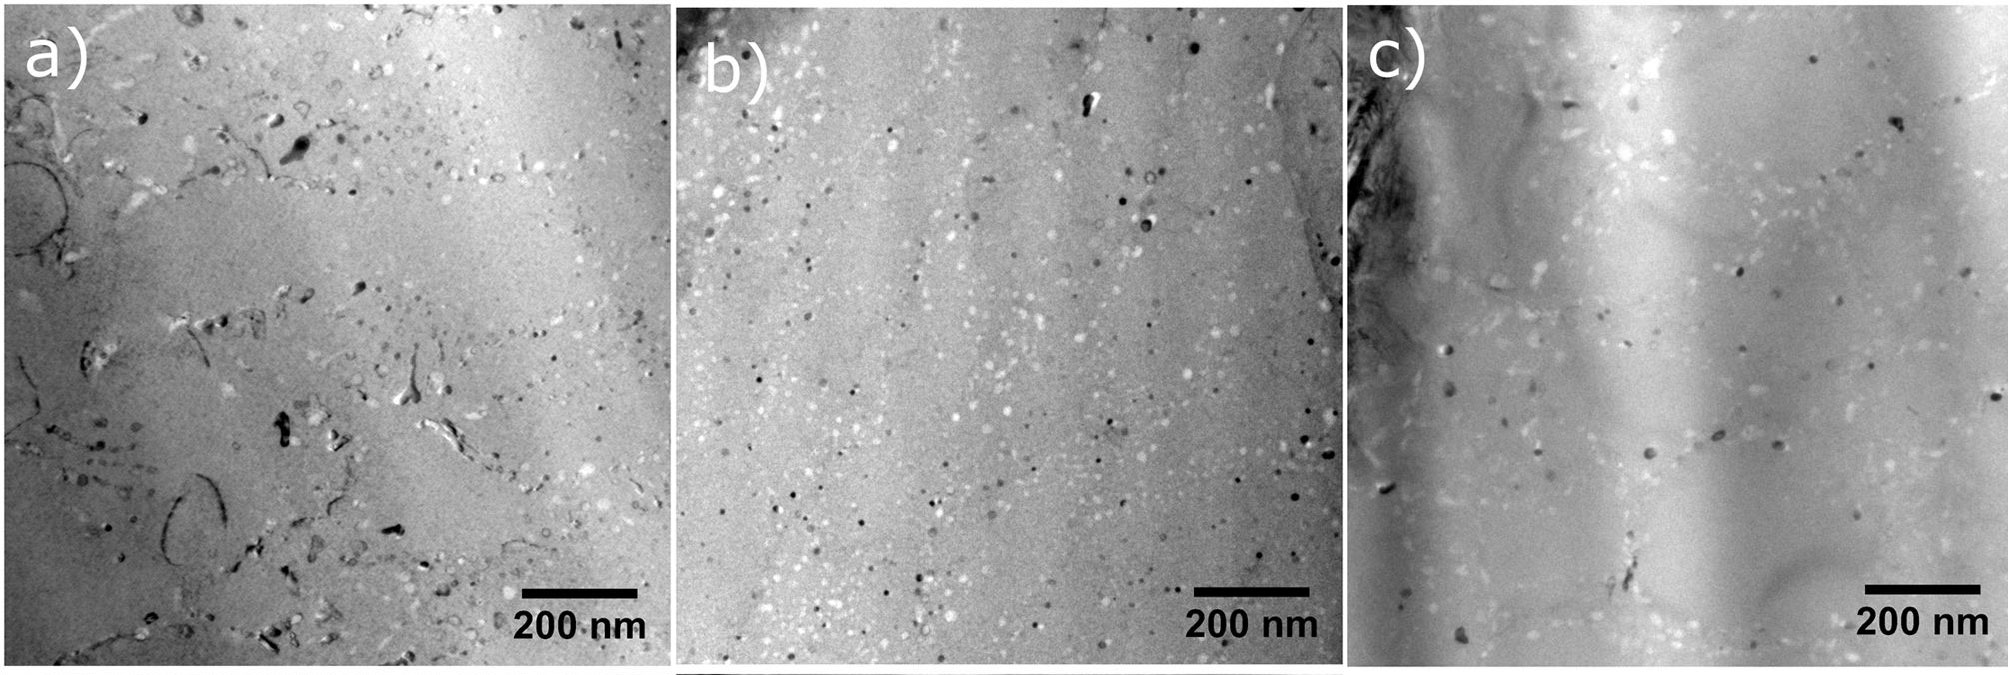 TEM images of the AM fabricated NiTi samples showing subgrain structure and precipitates decorating the subgrains in the (a) 35 µm hatch distance sample taken from the center of the laser track, the 120 µm hatch distance sample taken from (b) the center of the laser track, and (c) the edge of the laser track.